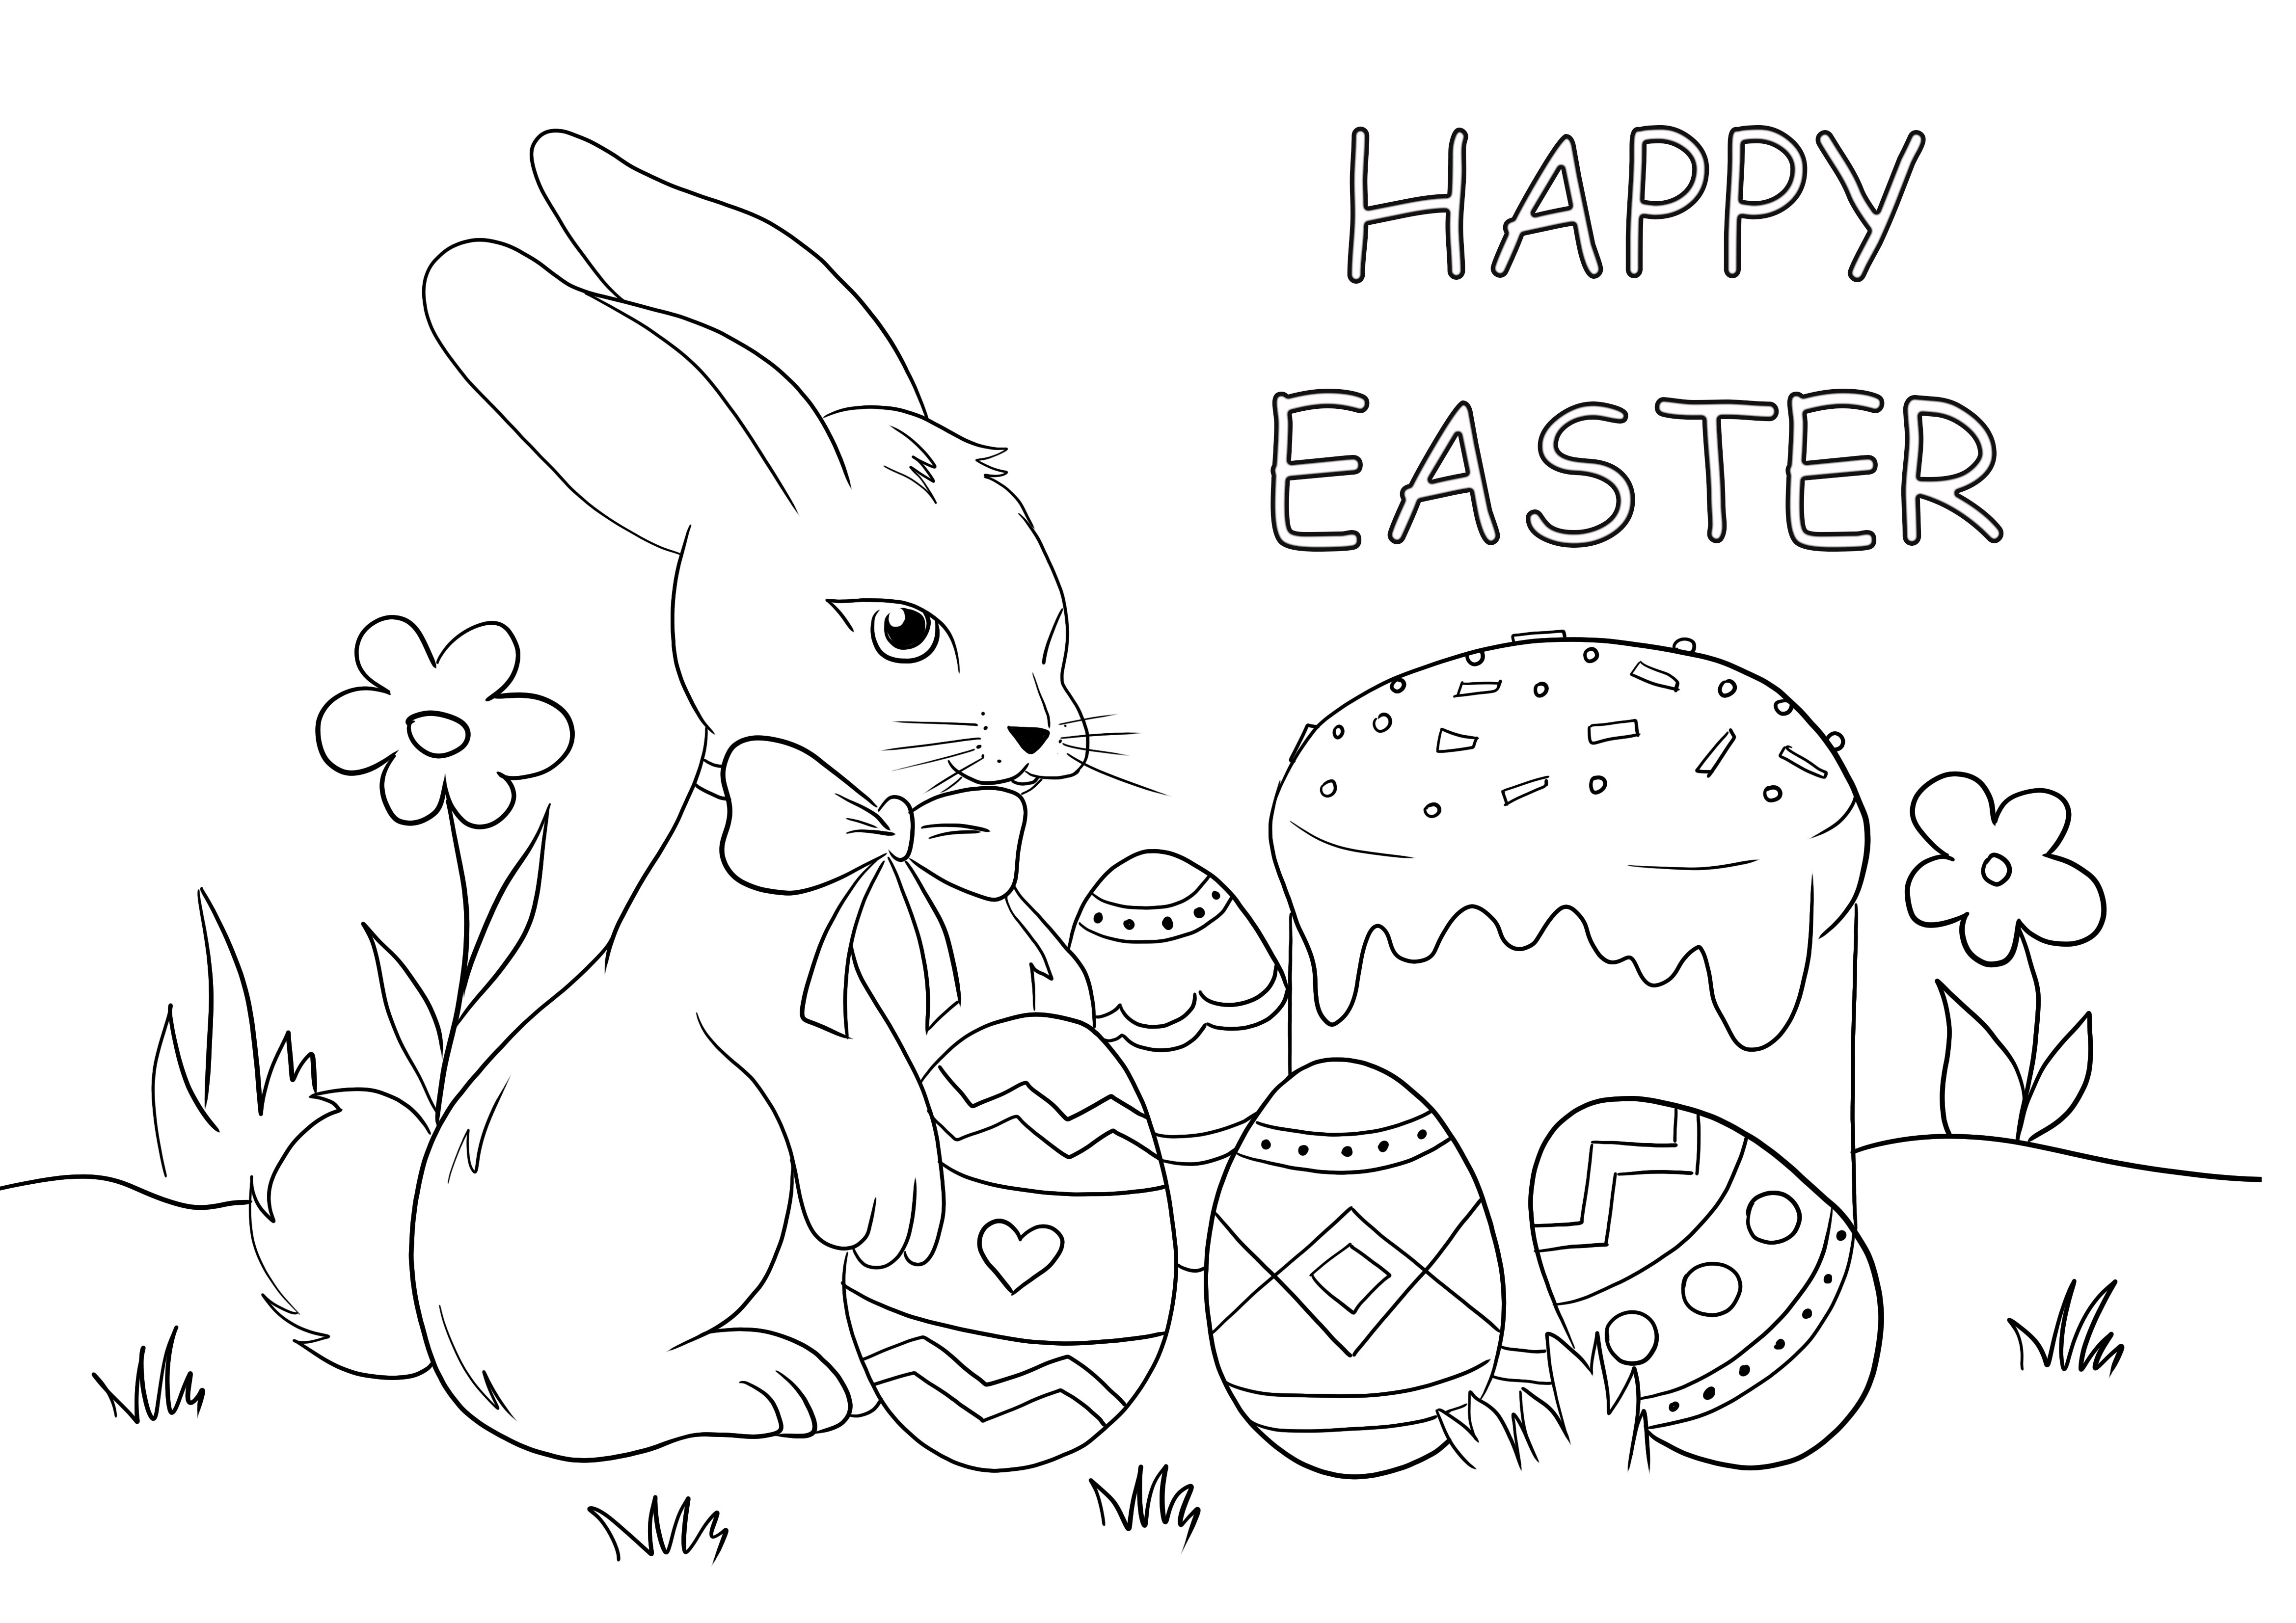 Happy Easter card to print and color free